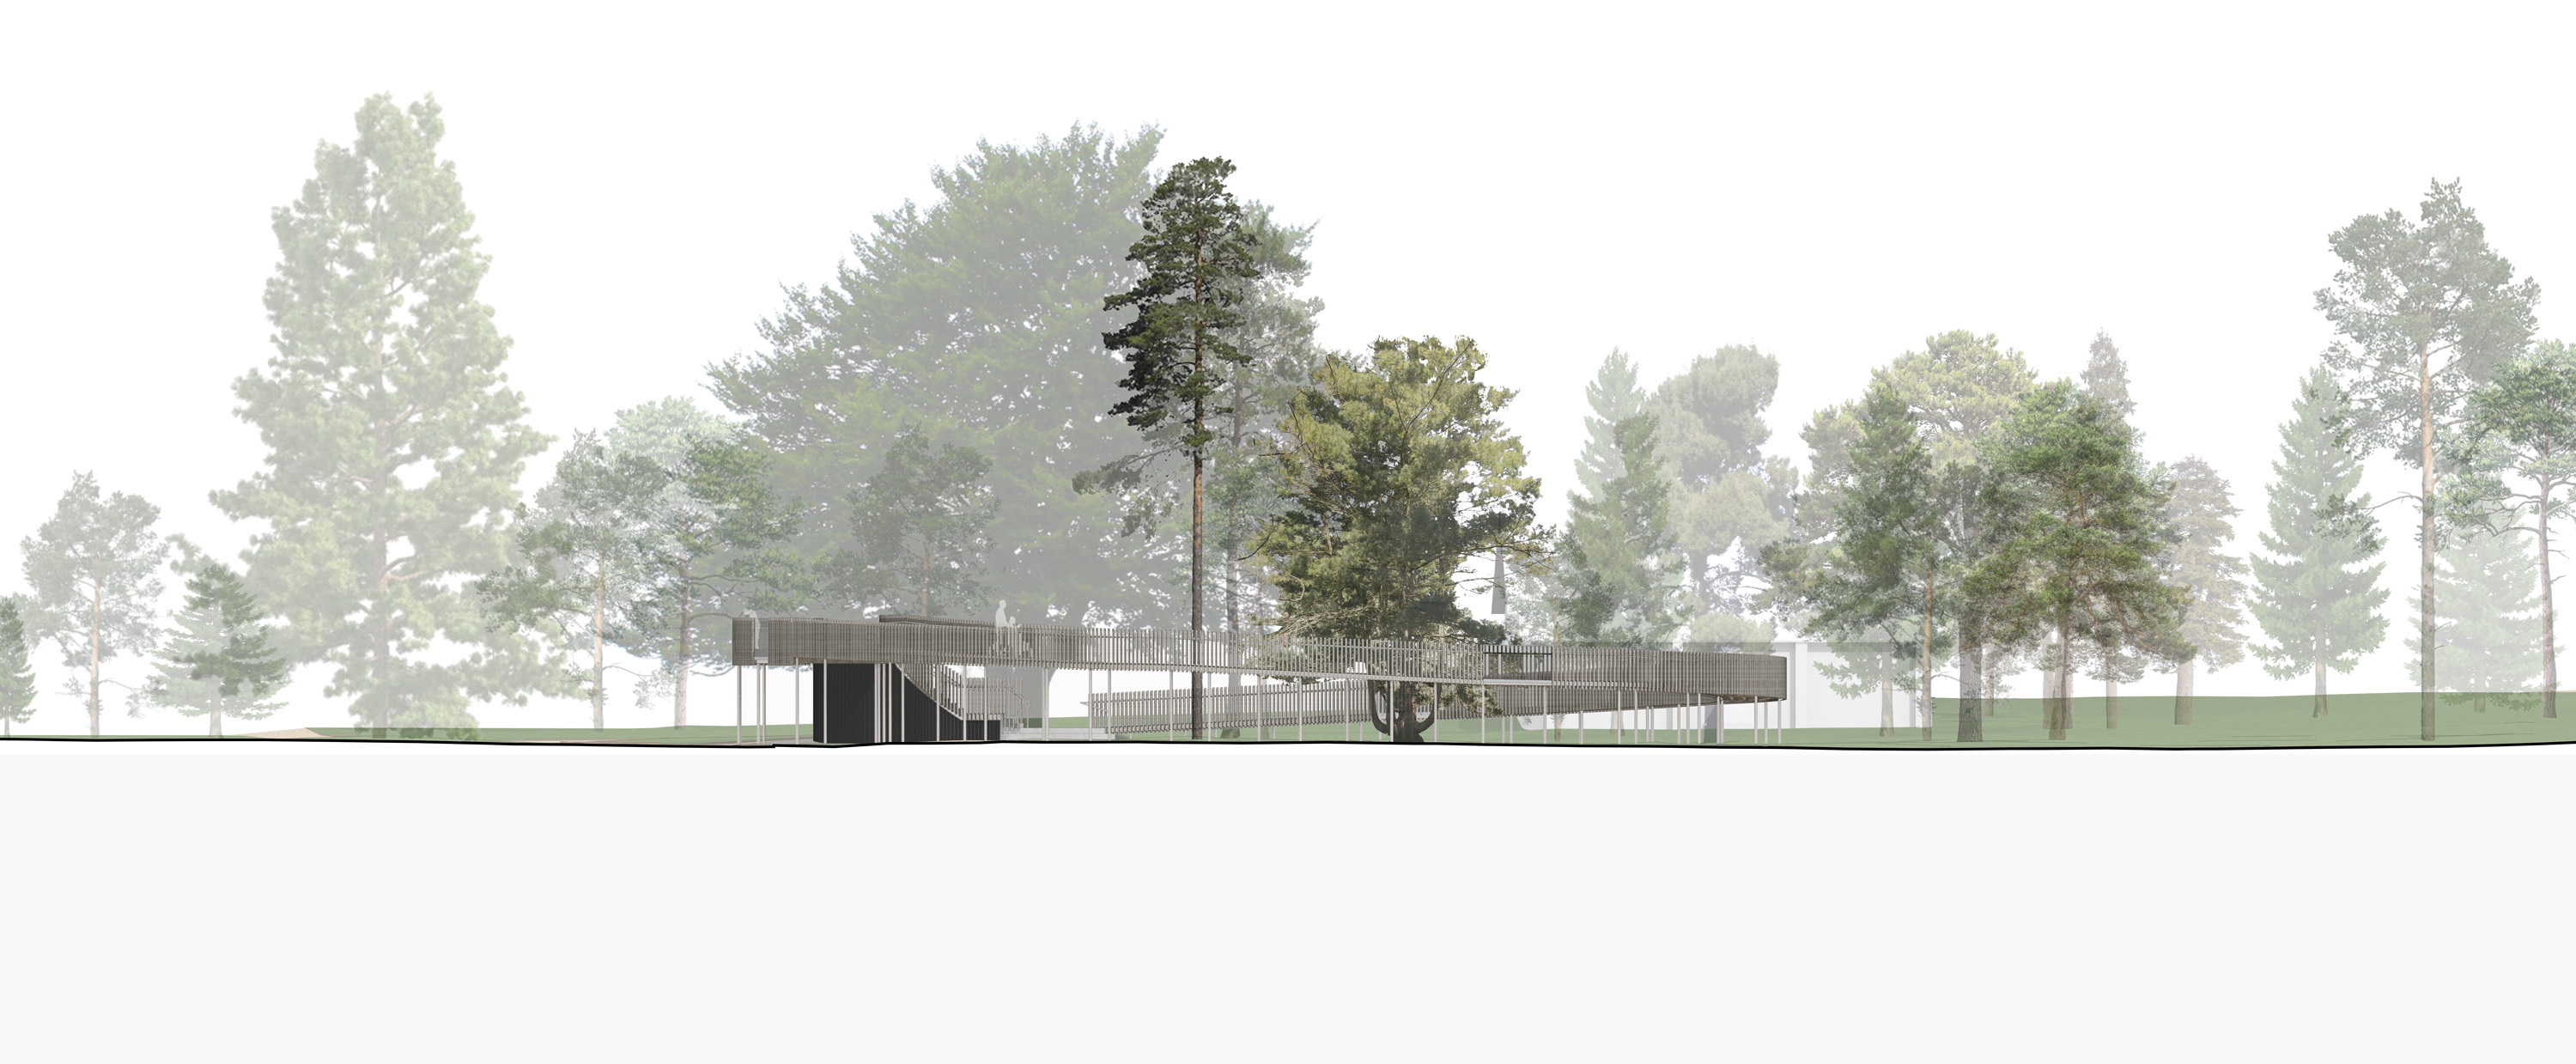 West elevation drawing of the Cambridge University Botanic Garden Rising Path by architects CDC Studio with trees in background